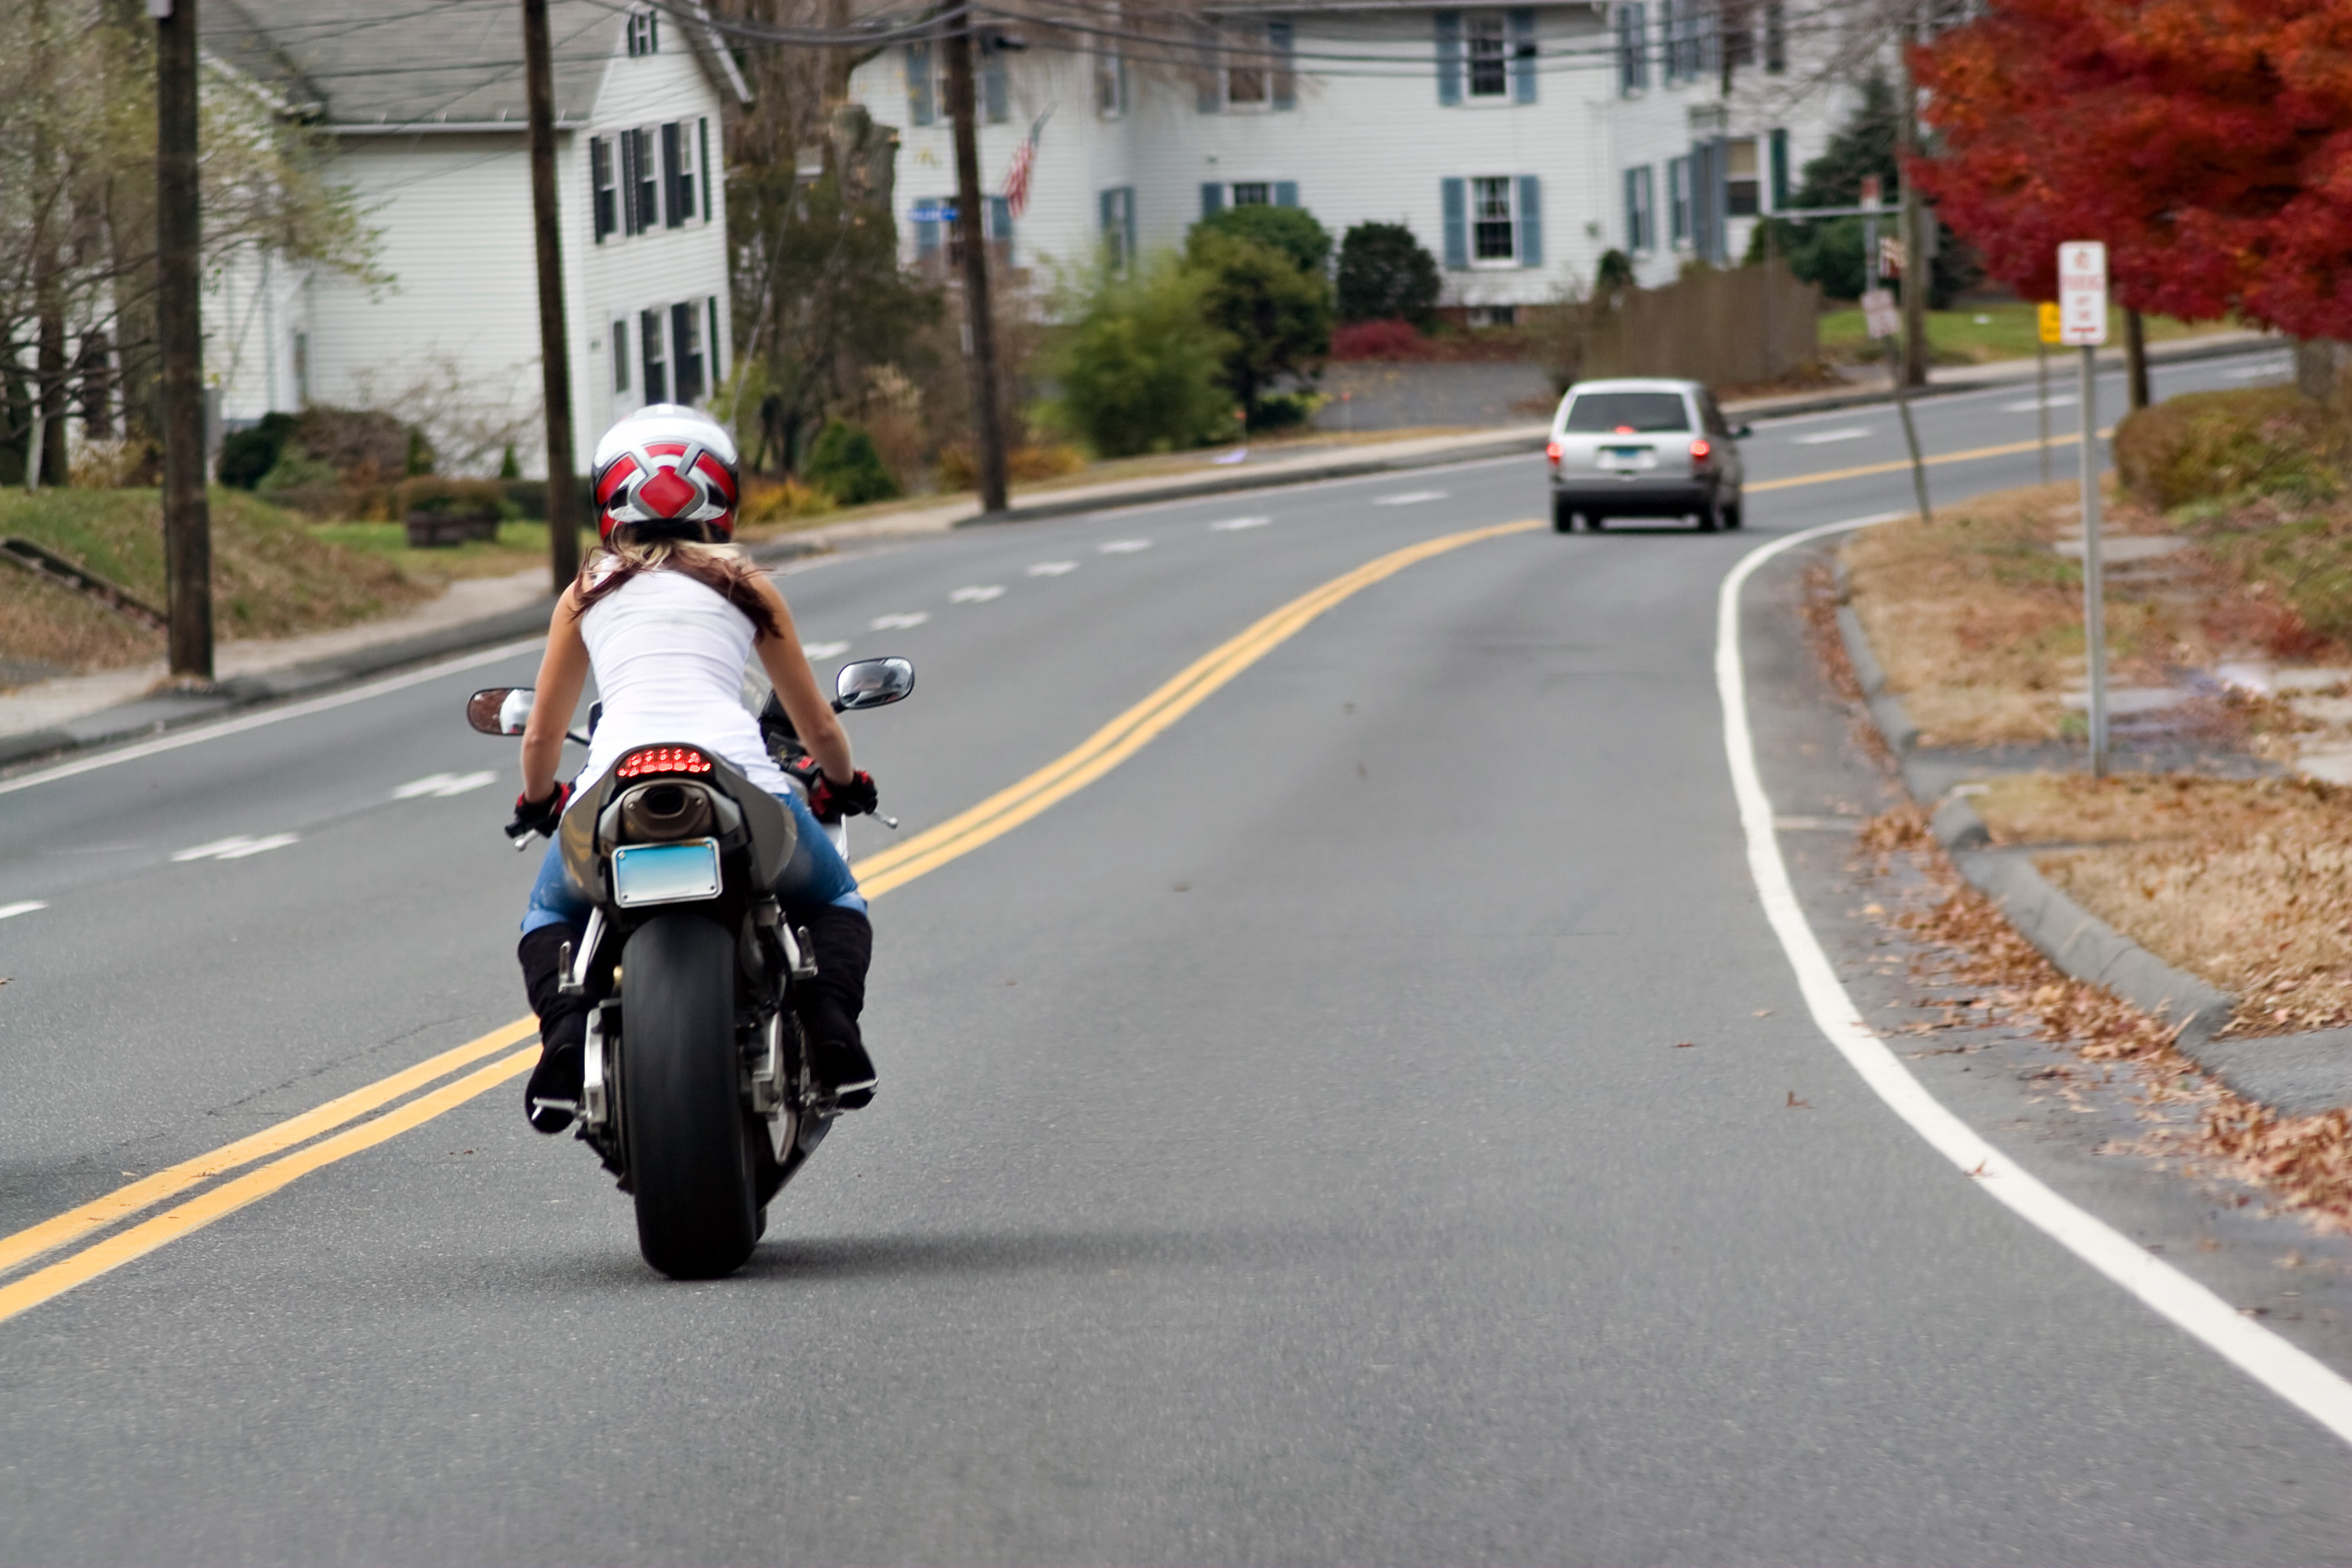 A Young Woman on a Motorcycle Maintains a Safe Following Distance with the Car Ahead